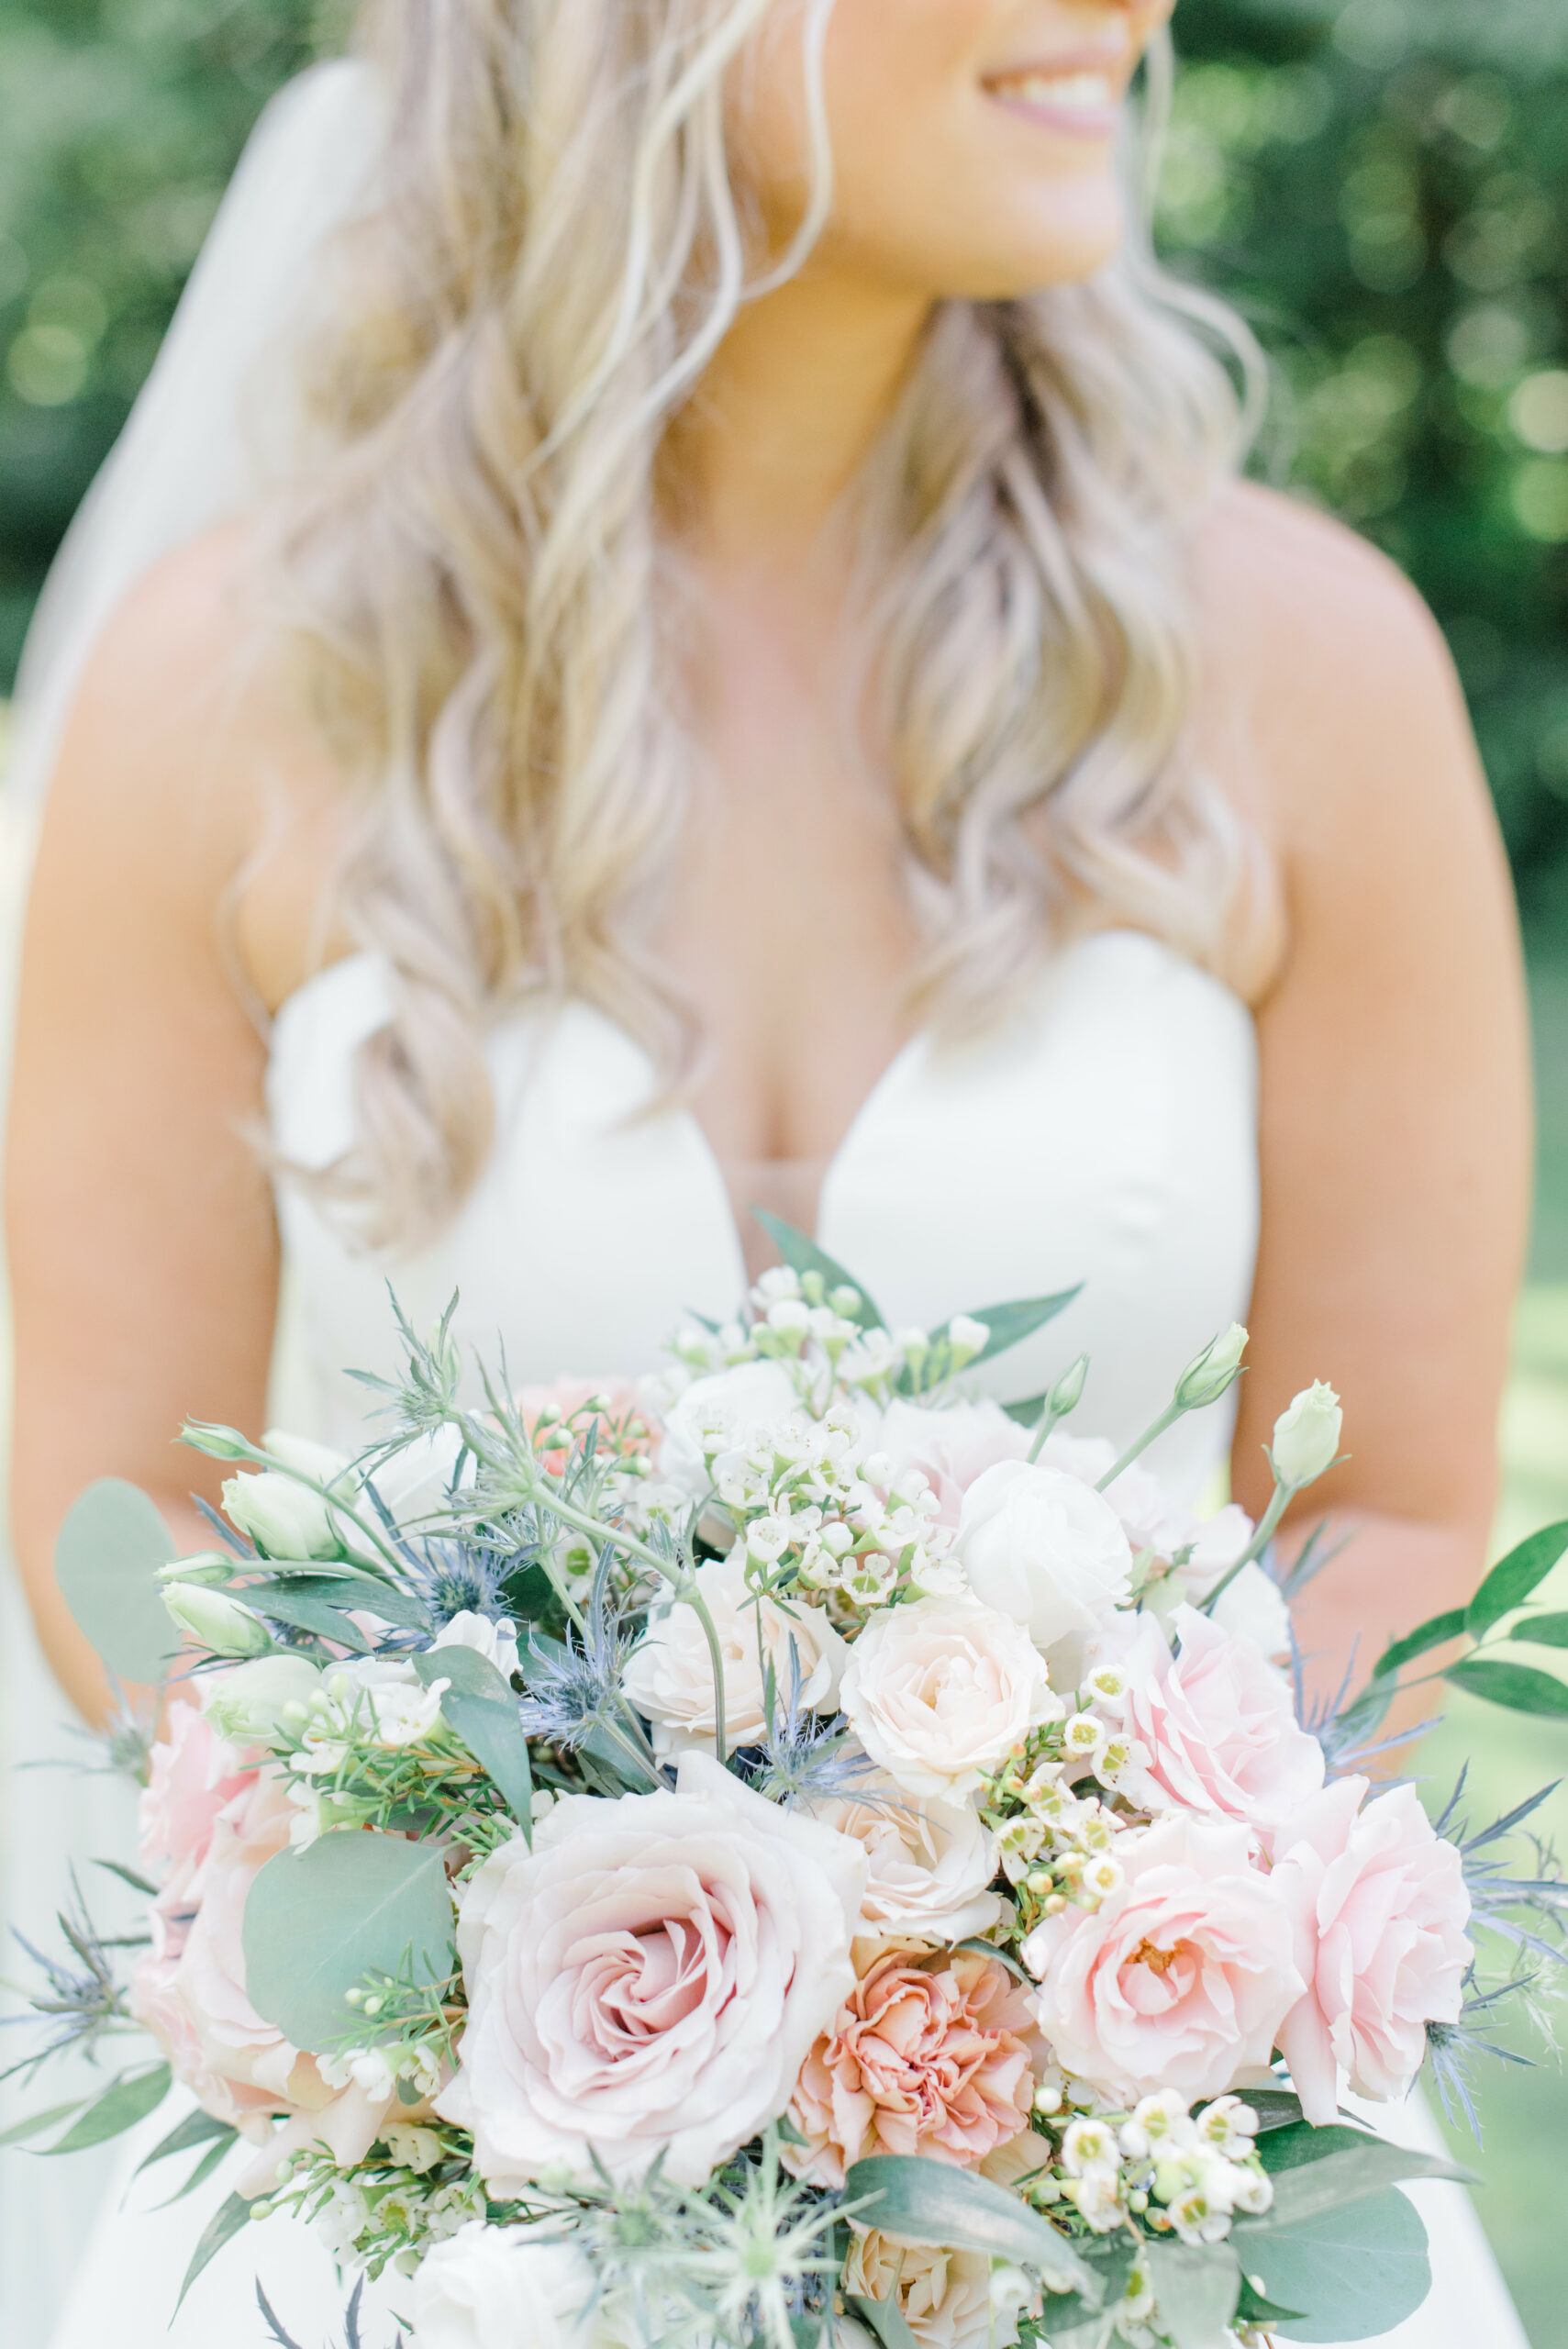 summer wedding at discovery lodge in evansville indiana, flowers by evansville florist emerald design, photo by katie rhodes photography